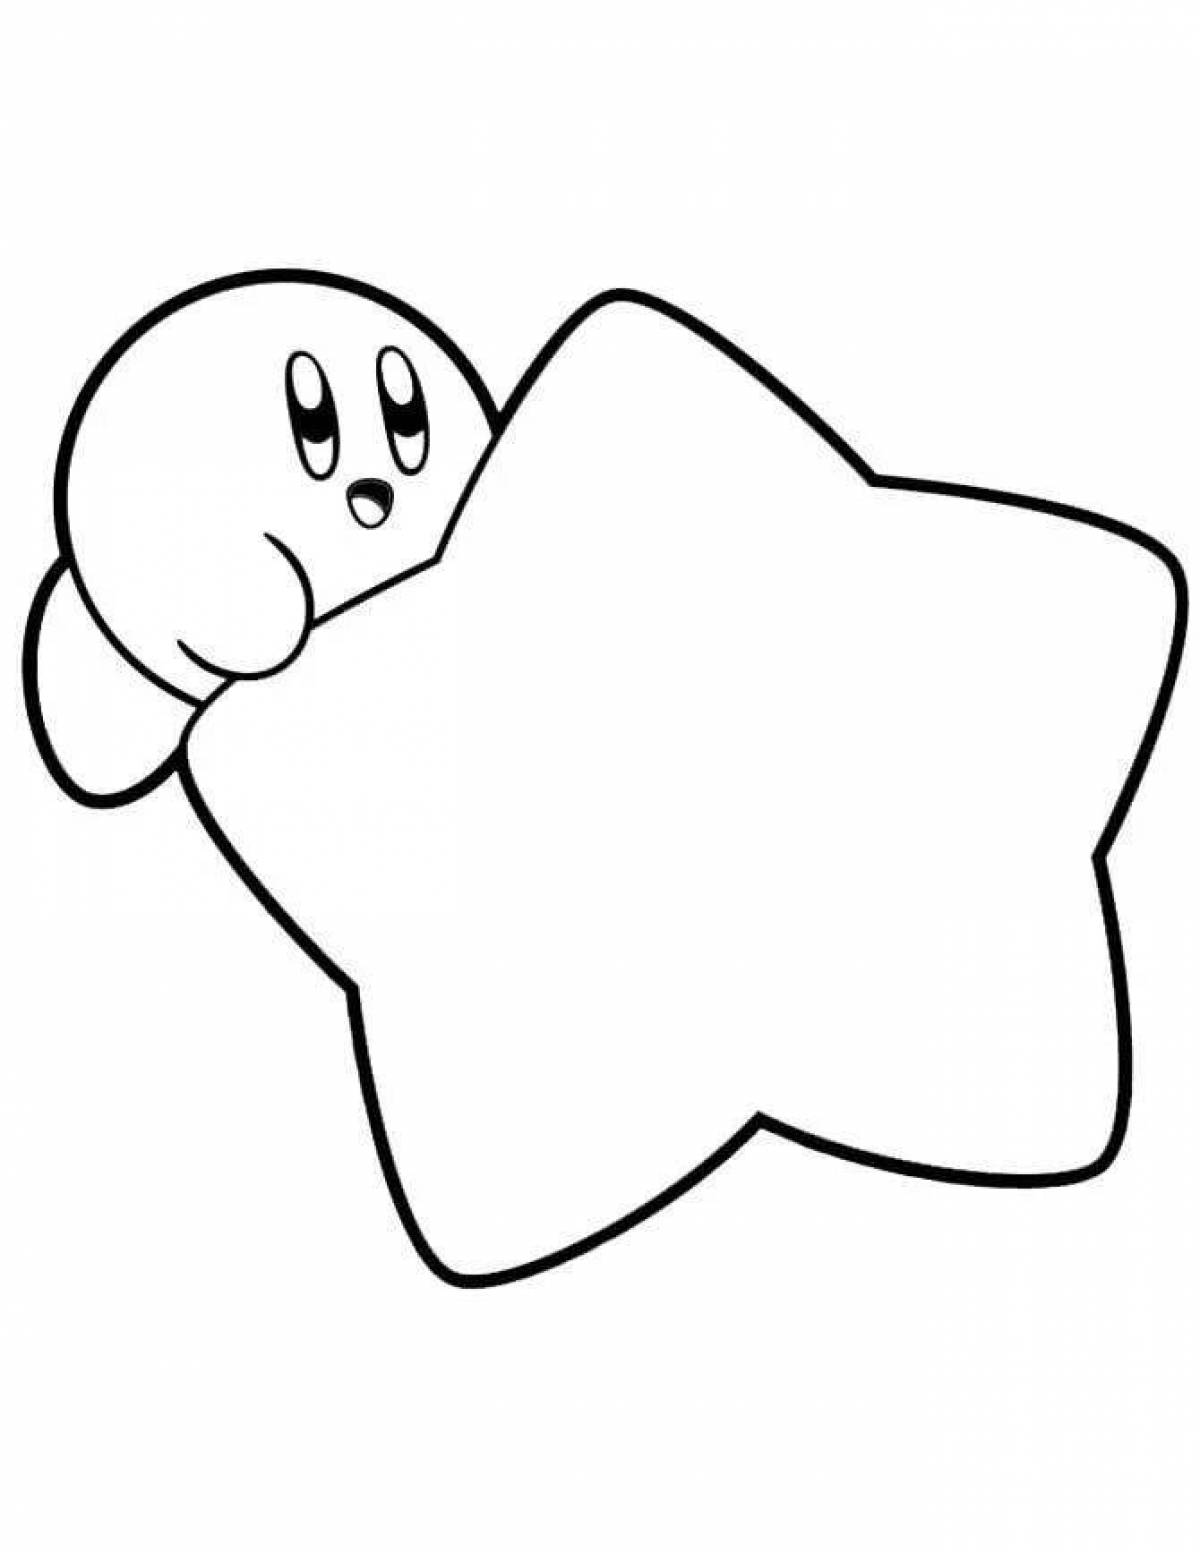 Animated kirby coloring page